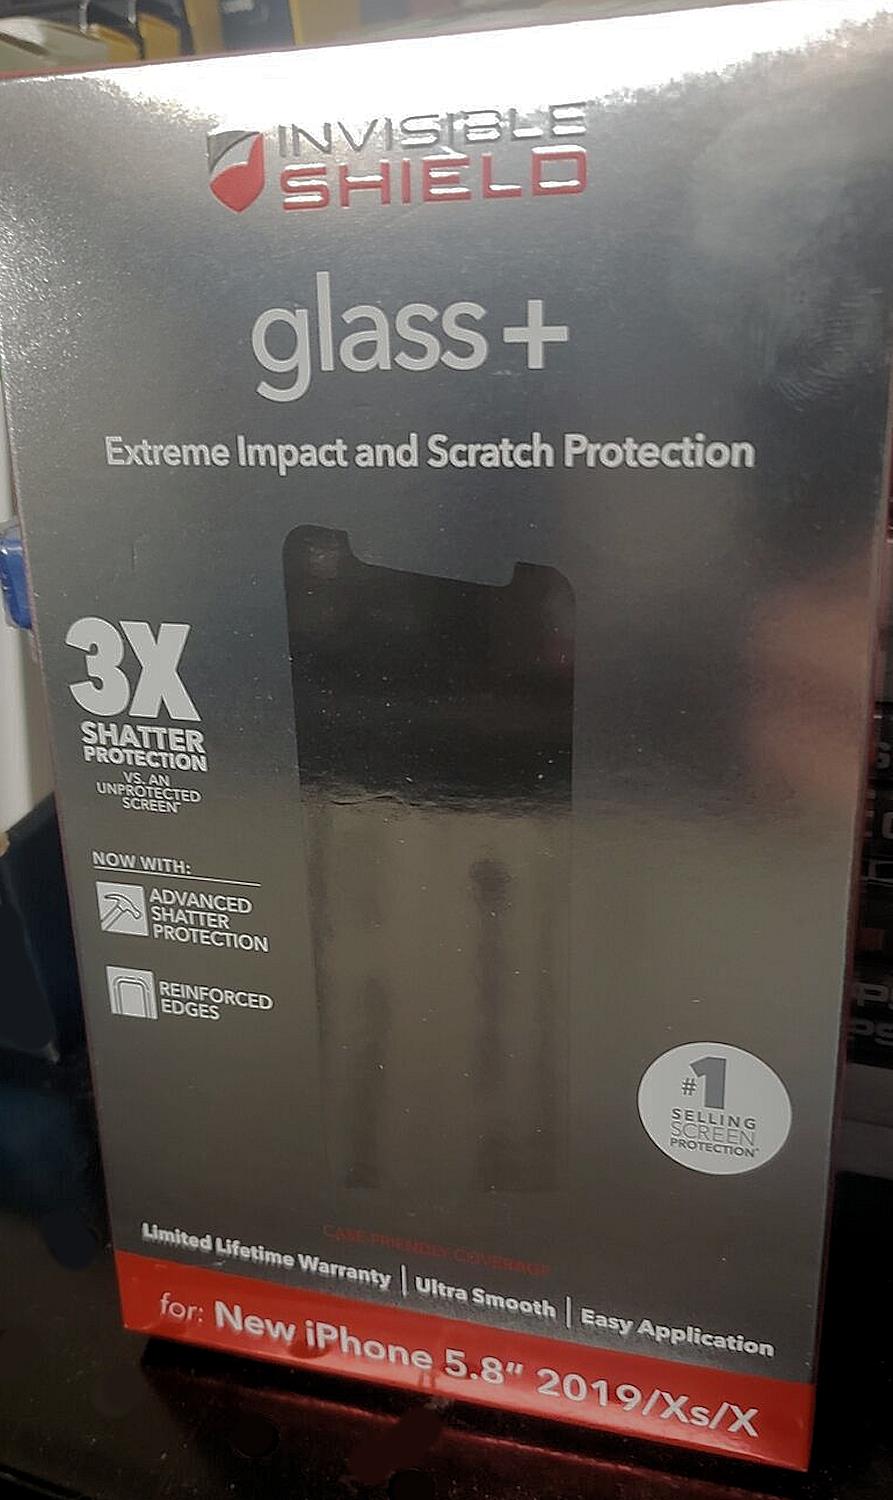 Zagg Invisible Shield Glass+ for NEW iPhone 5.8" 2019/Xs/X